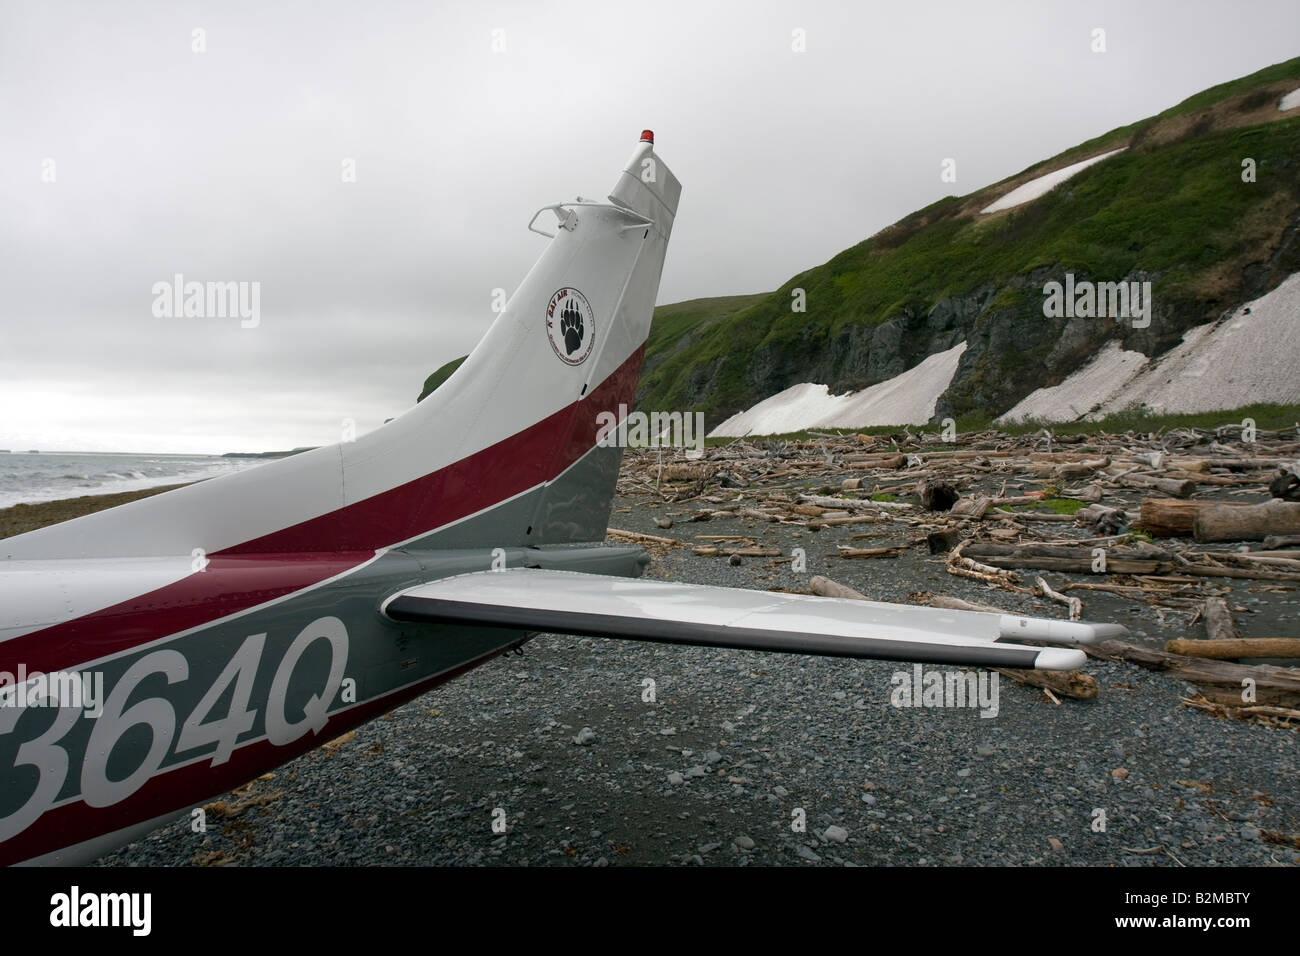 Tail til a cessna on a beach with driftwood. Stock Photo